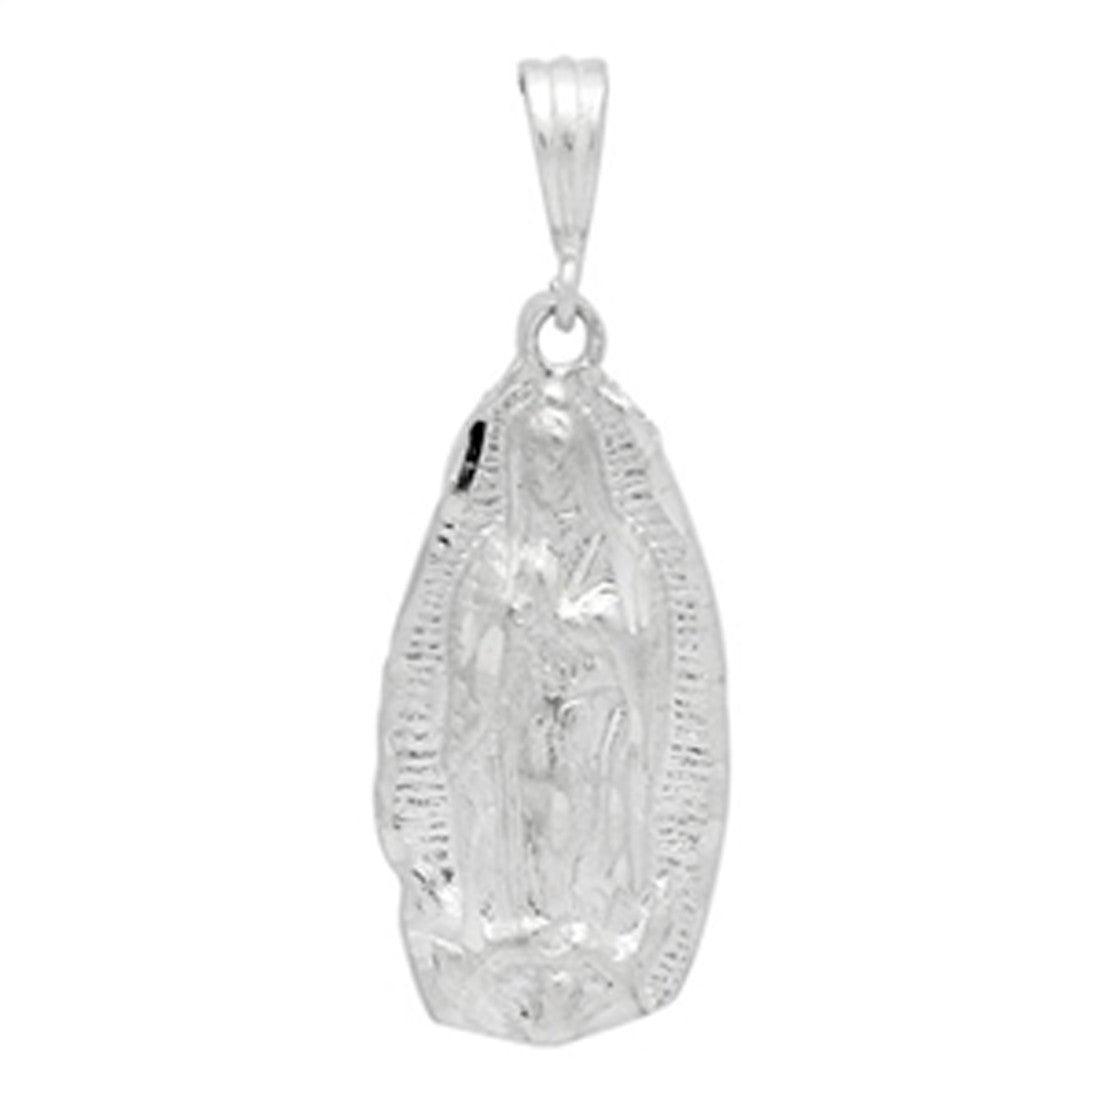 Guadalupe Pendant 925 Sterling Silver charm 35mm Long-Blue Apple Jewelary